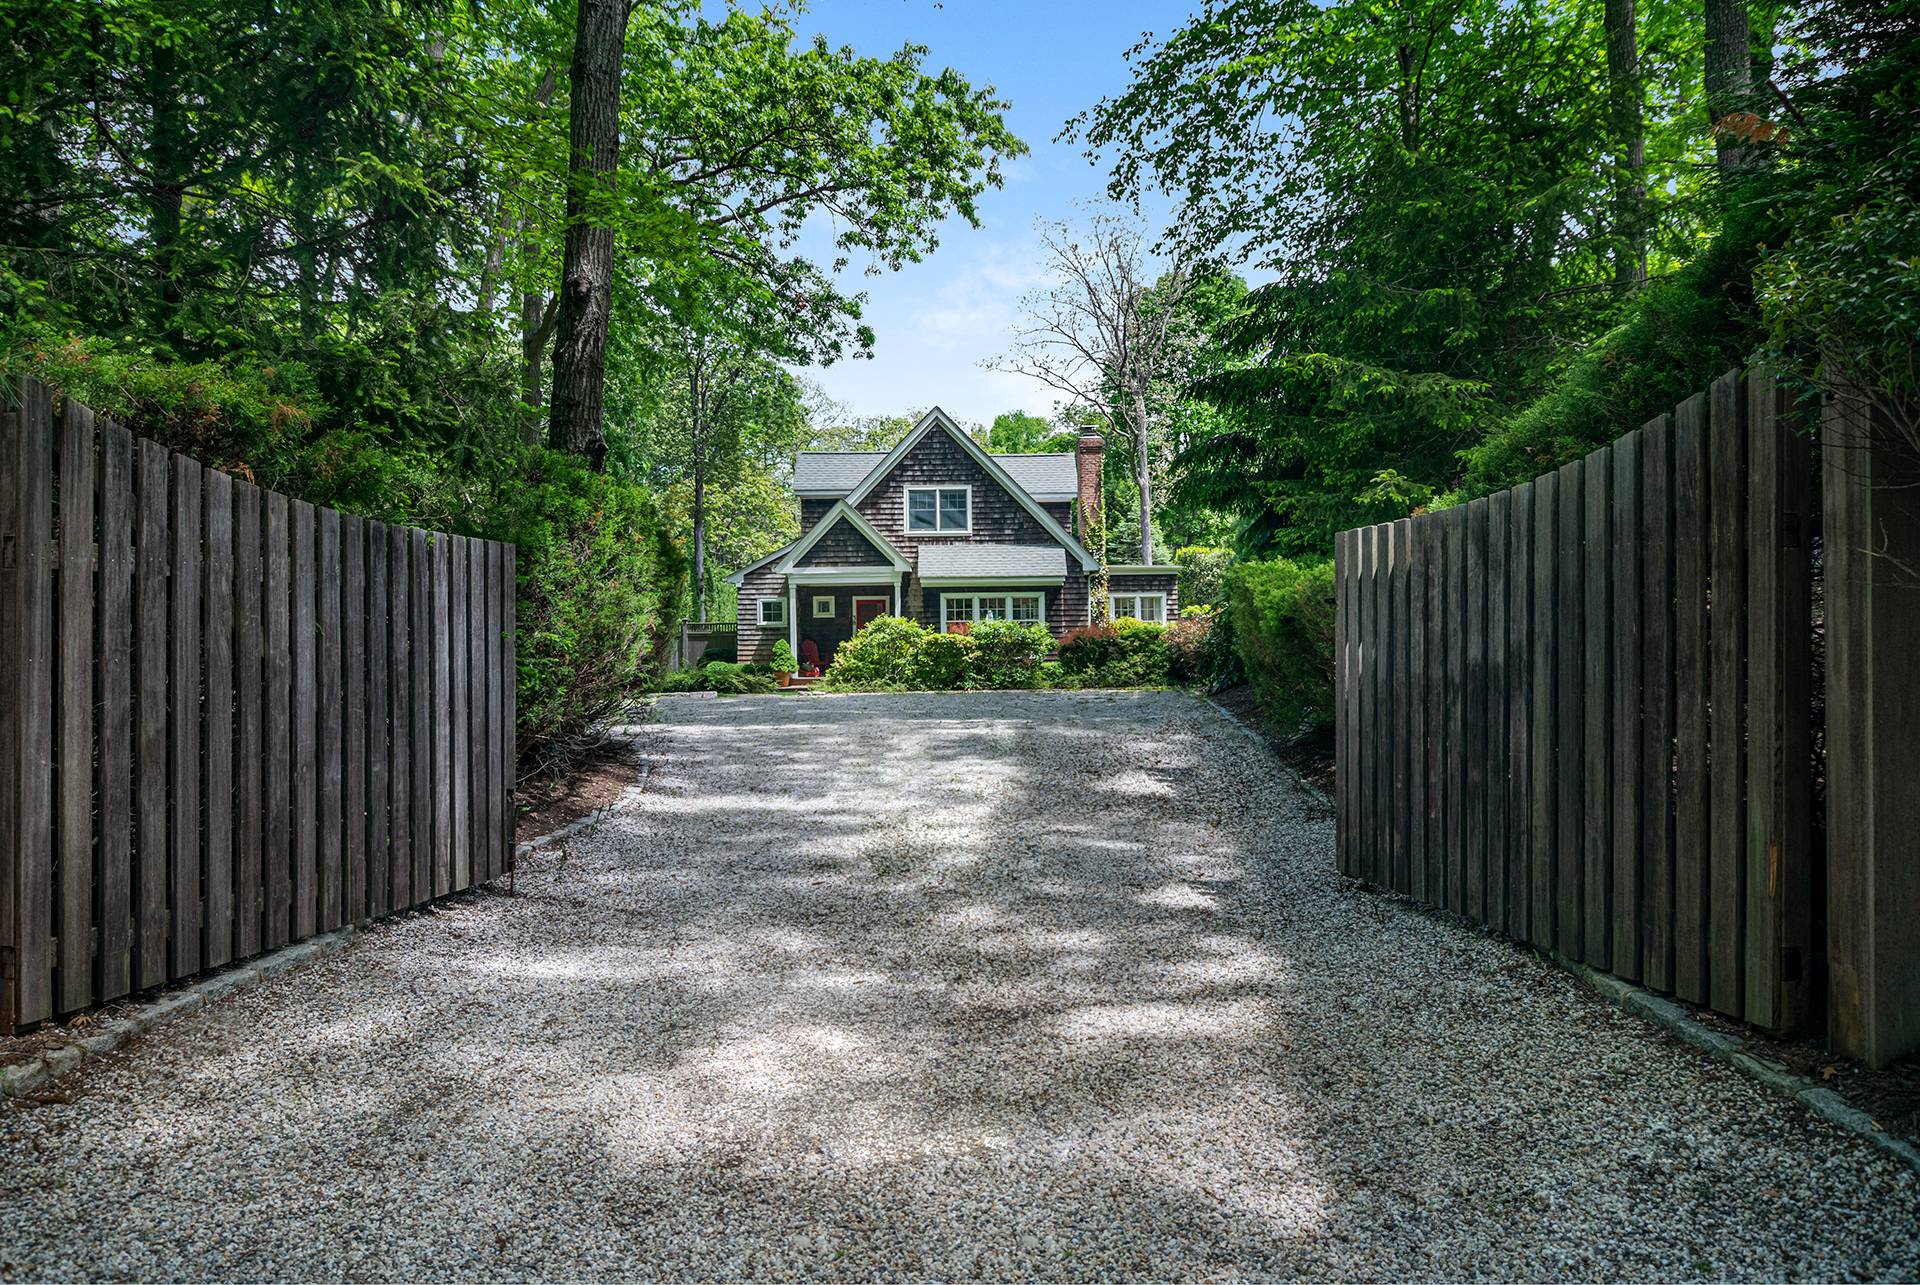 38 Sycamore Drive, Springs, Hamptons, NY - 3 Bedrooms  
3.5 Bathrooms - 